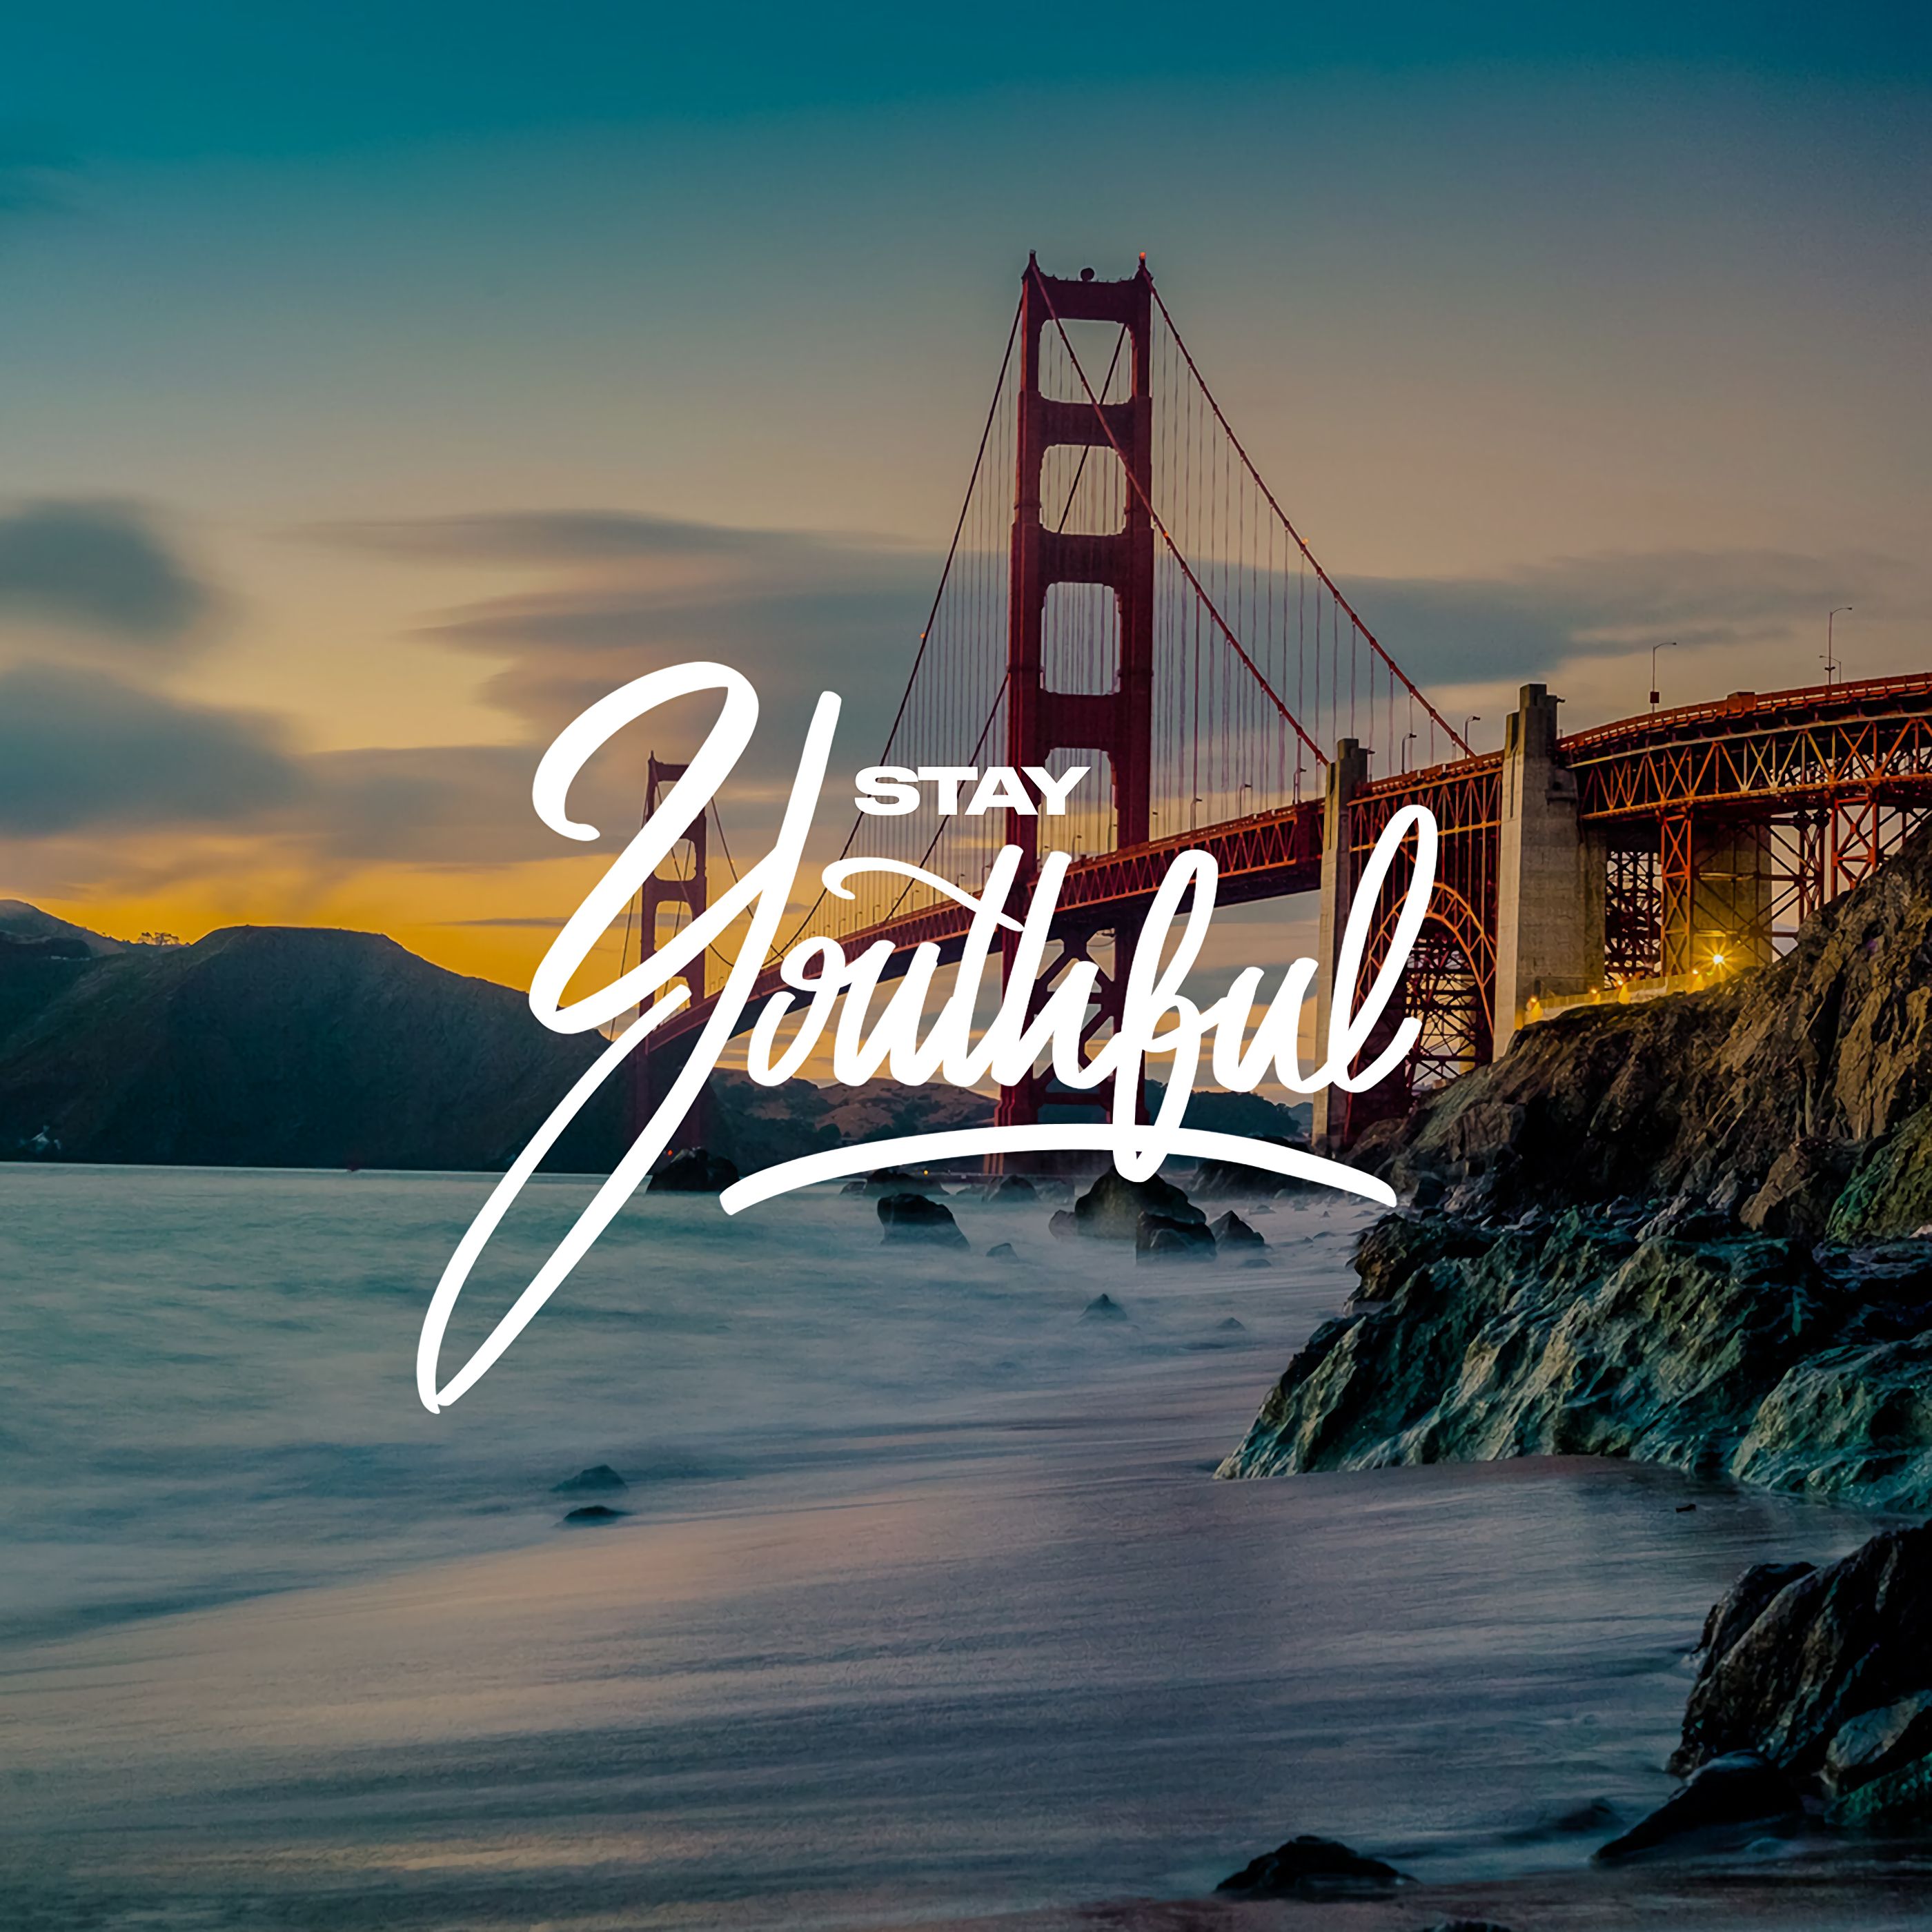 iPhone Wallpapers nature, youth, words, bridge San Francisco